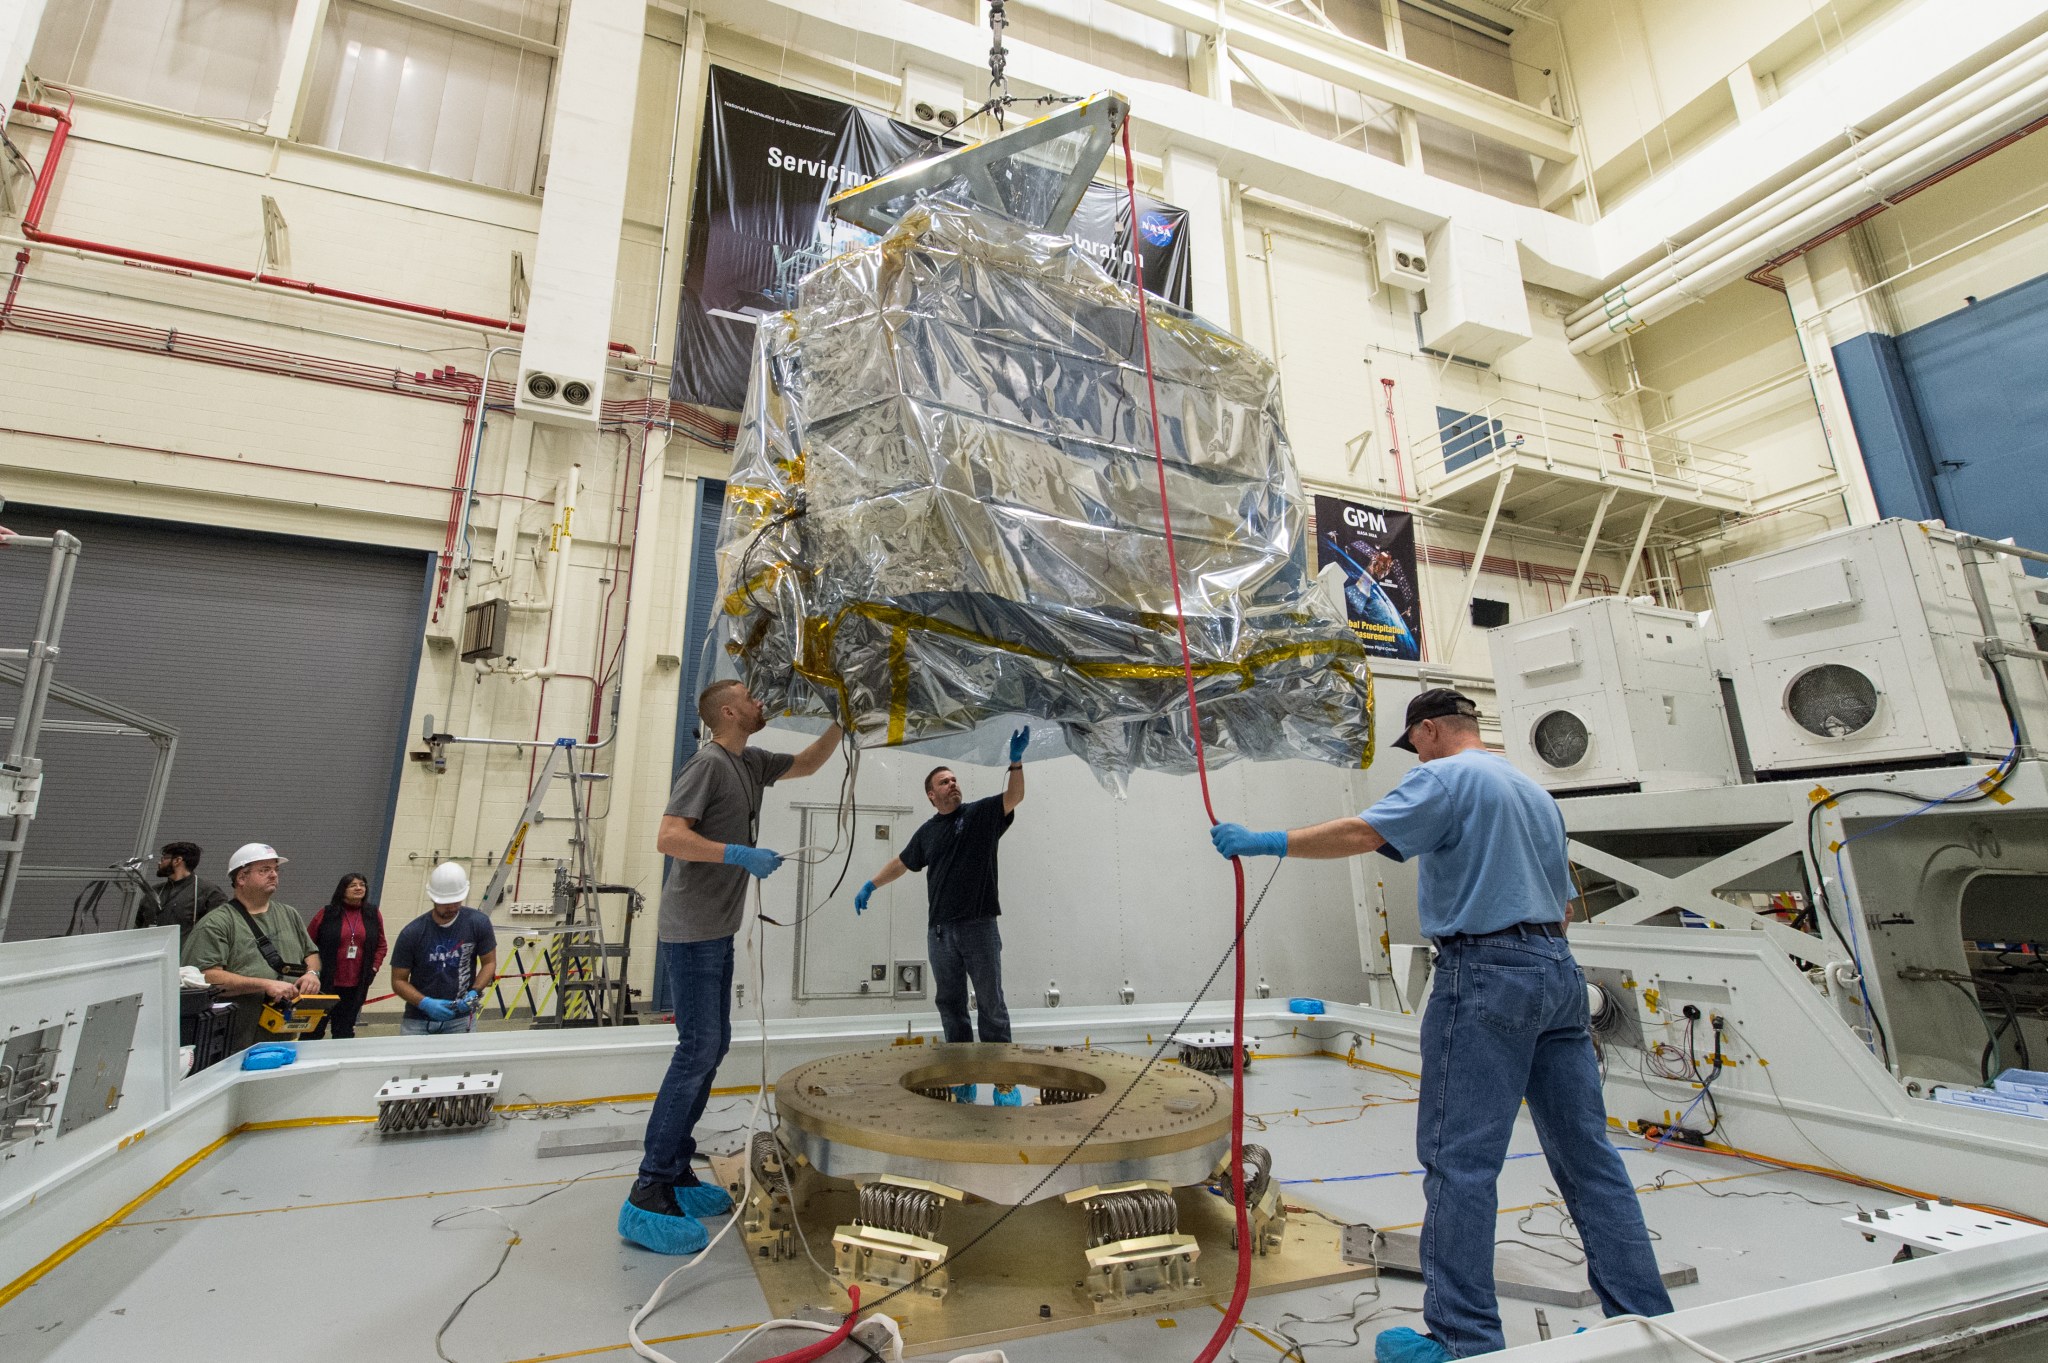 The ATLAS team carefully lowers the instrument onto a platform, held up by wires. The spacecraft is wrapped in silver foil.